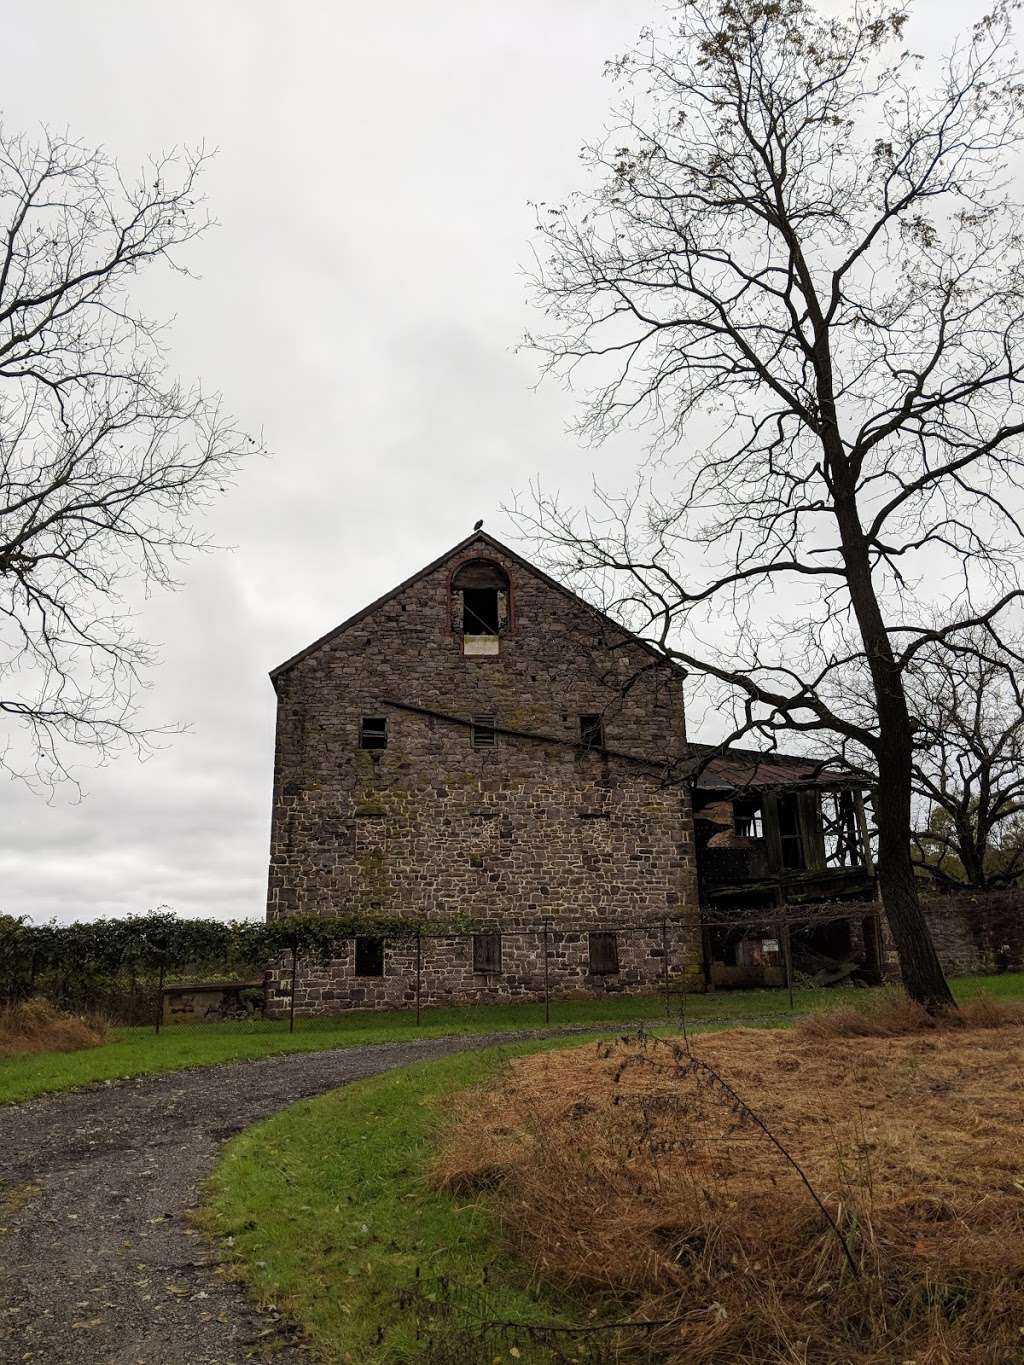 Pawling Farm | Valley Forge National Historical Park, King of Prussia, PA 19406, USA